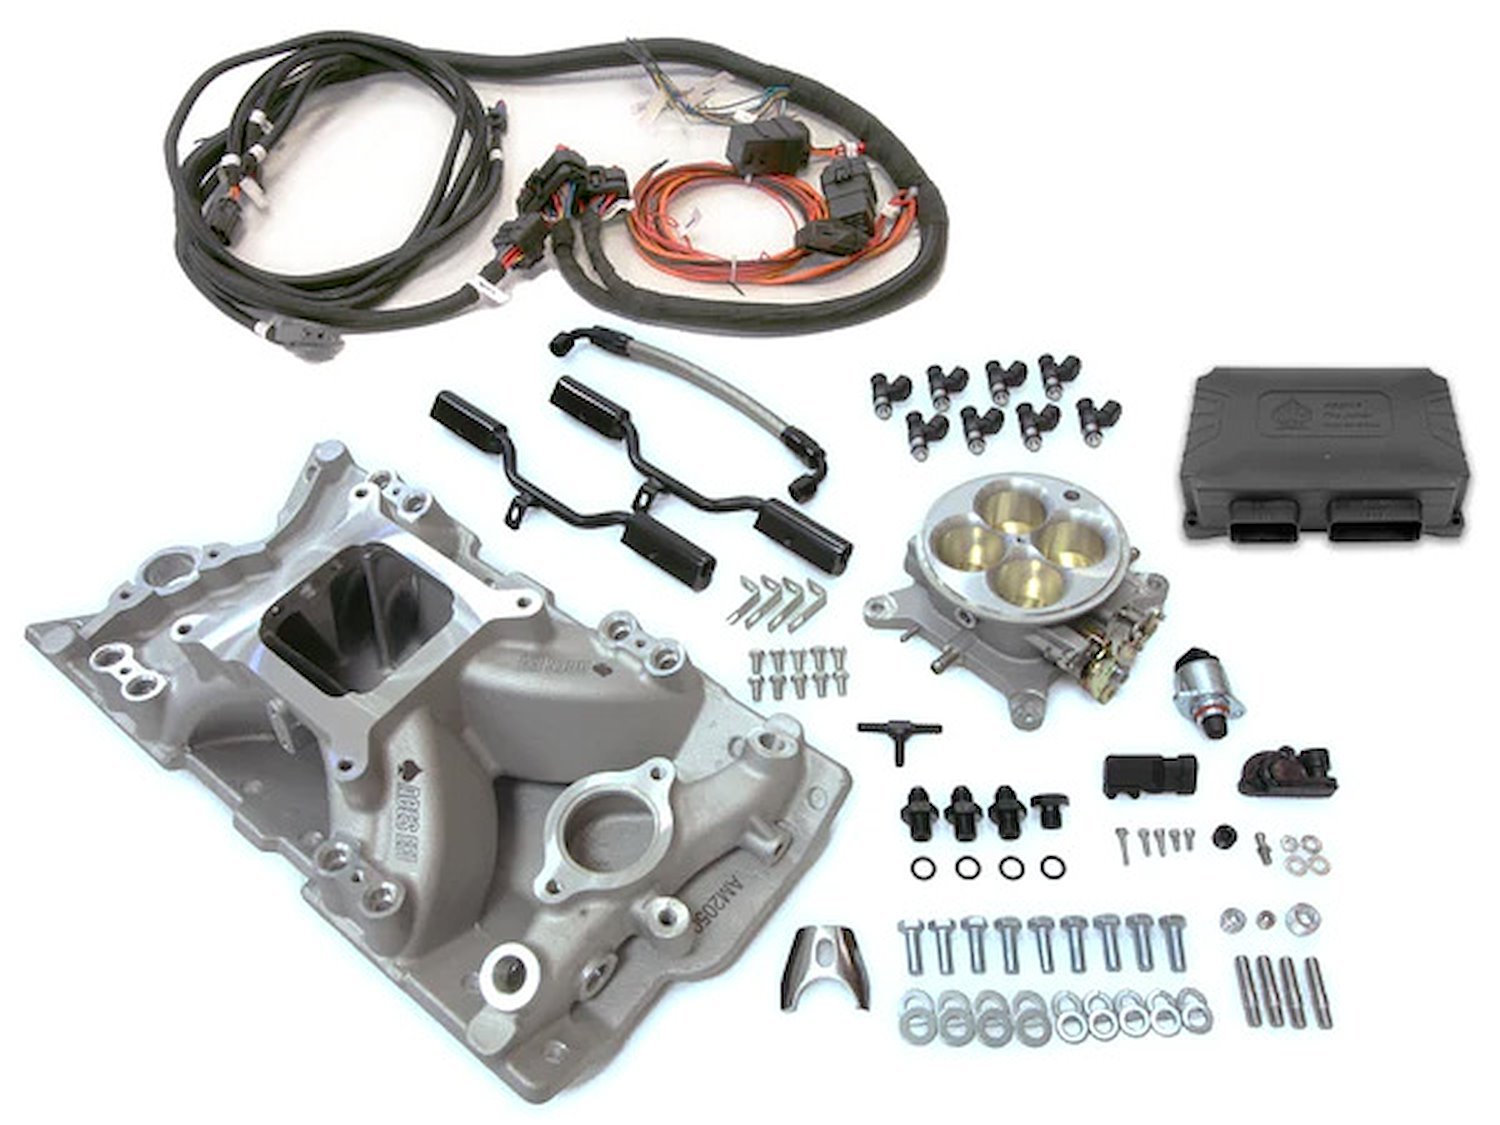 AS2015P-SBF-S2070 The Joker EFI Standalone Management System, Small Block Ford, with Silver AM2070 Intake Manifold